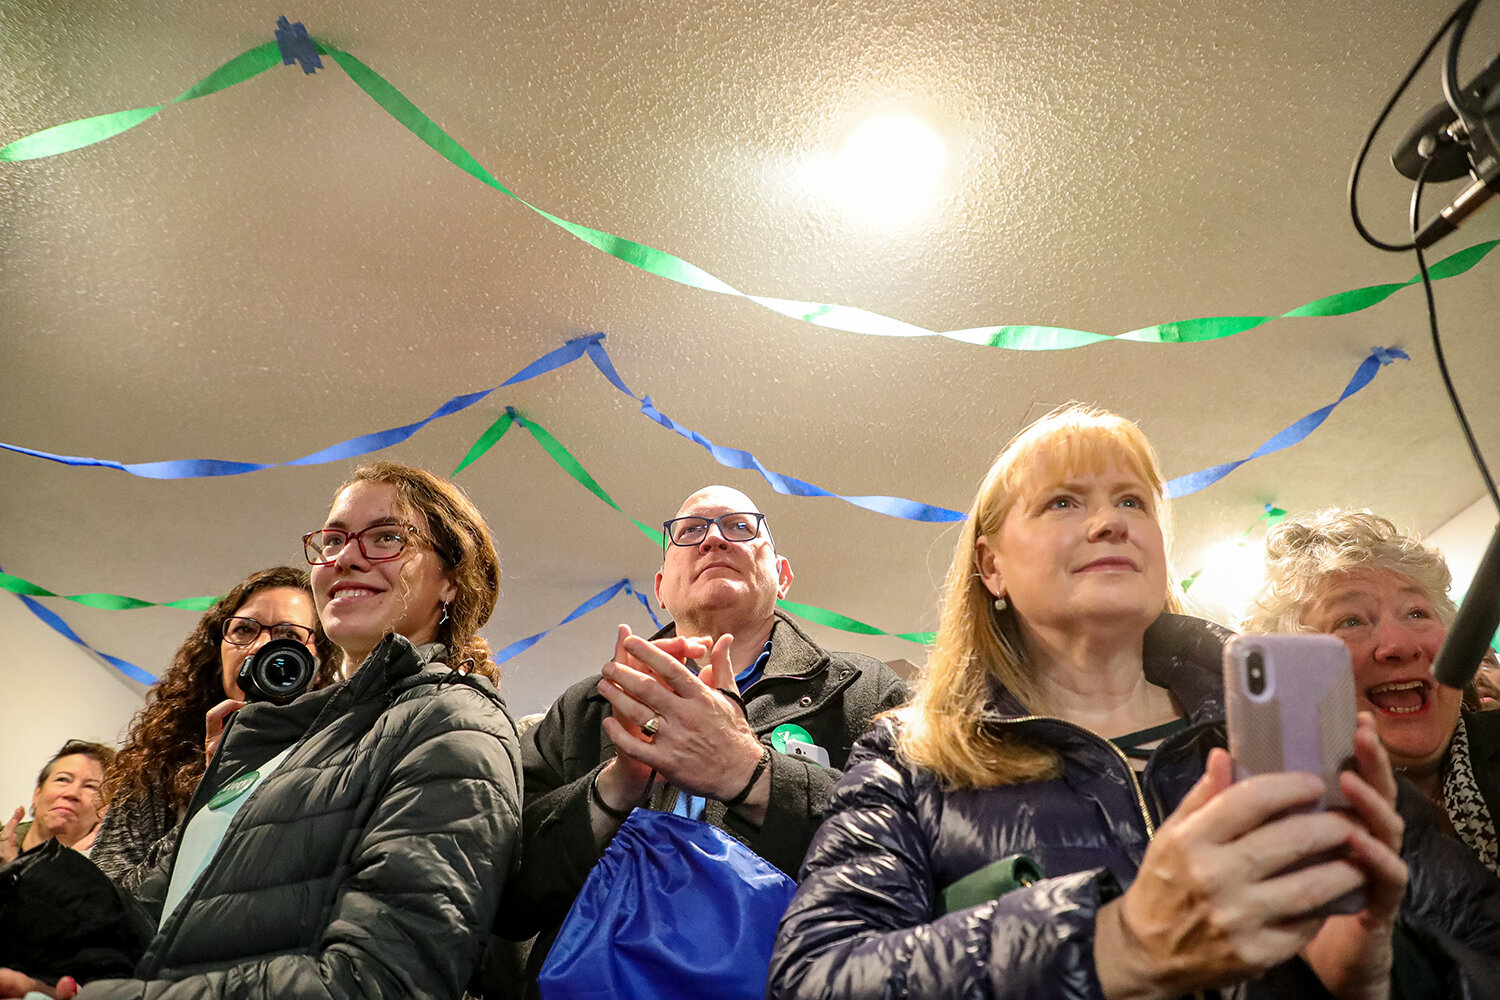  Steven Damm of Iowa City (center) applauds while listening to Democratic Presidential Candidate Amy Klobuchar (D-MN) speak during a visit to Iowa City for the opening of a new campaign office on Saturday, Dec. 28, 2019.  